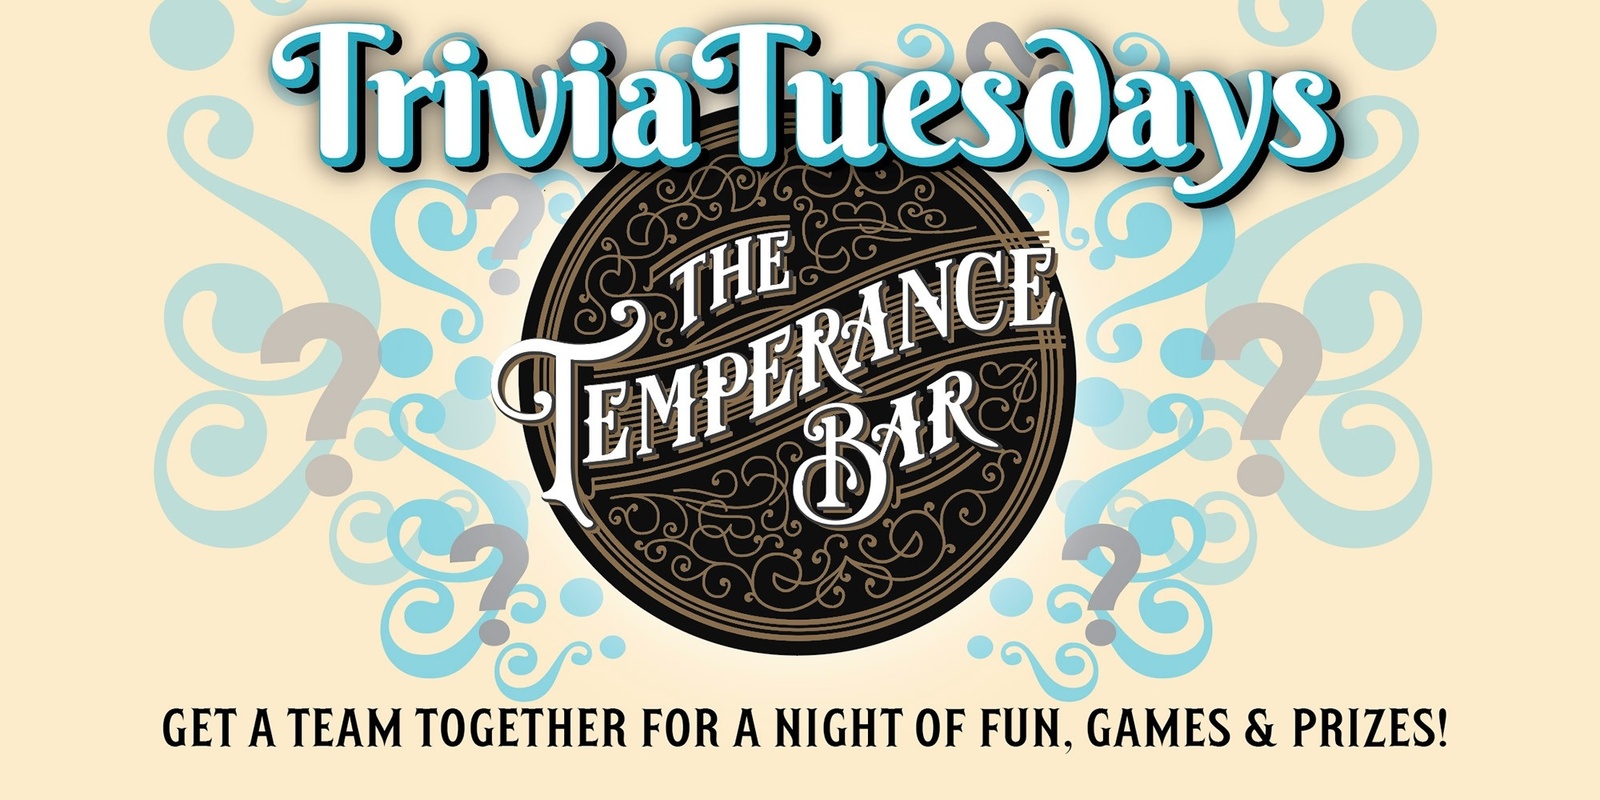 Banner image for Trivia Tuesdays in the Temperance Bar